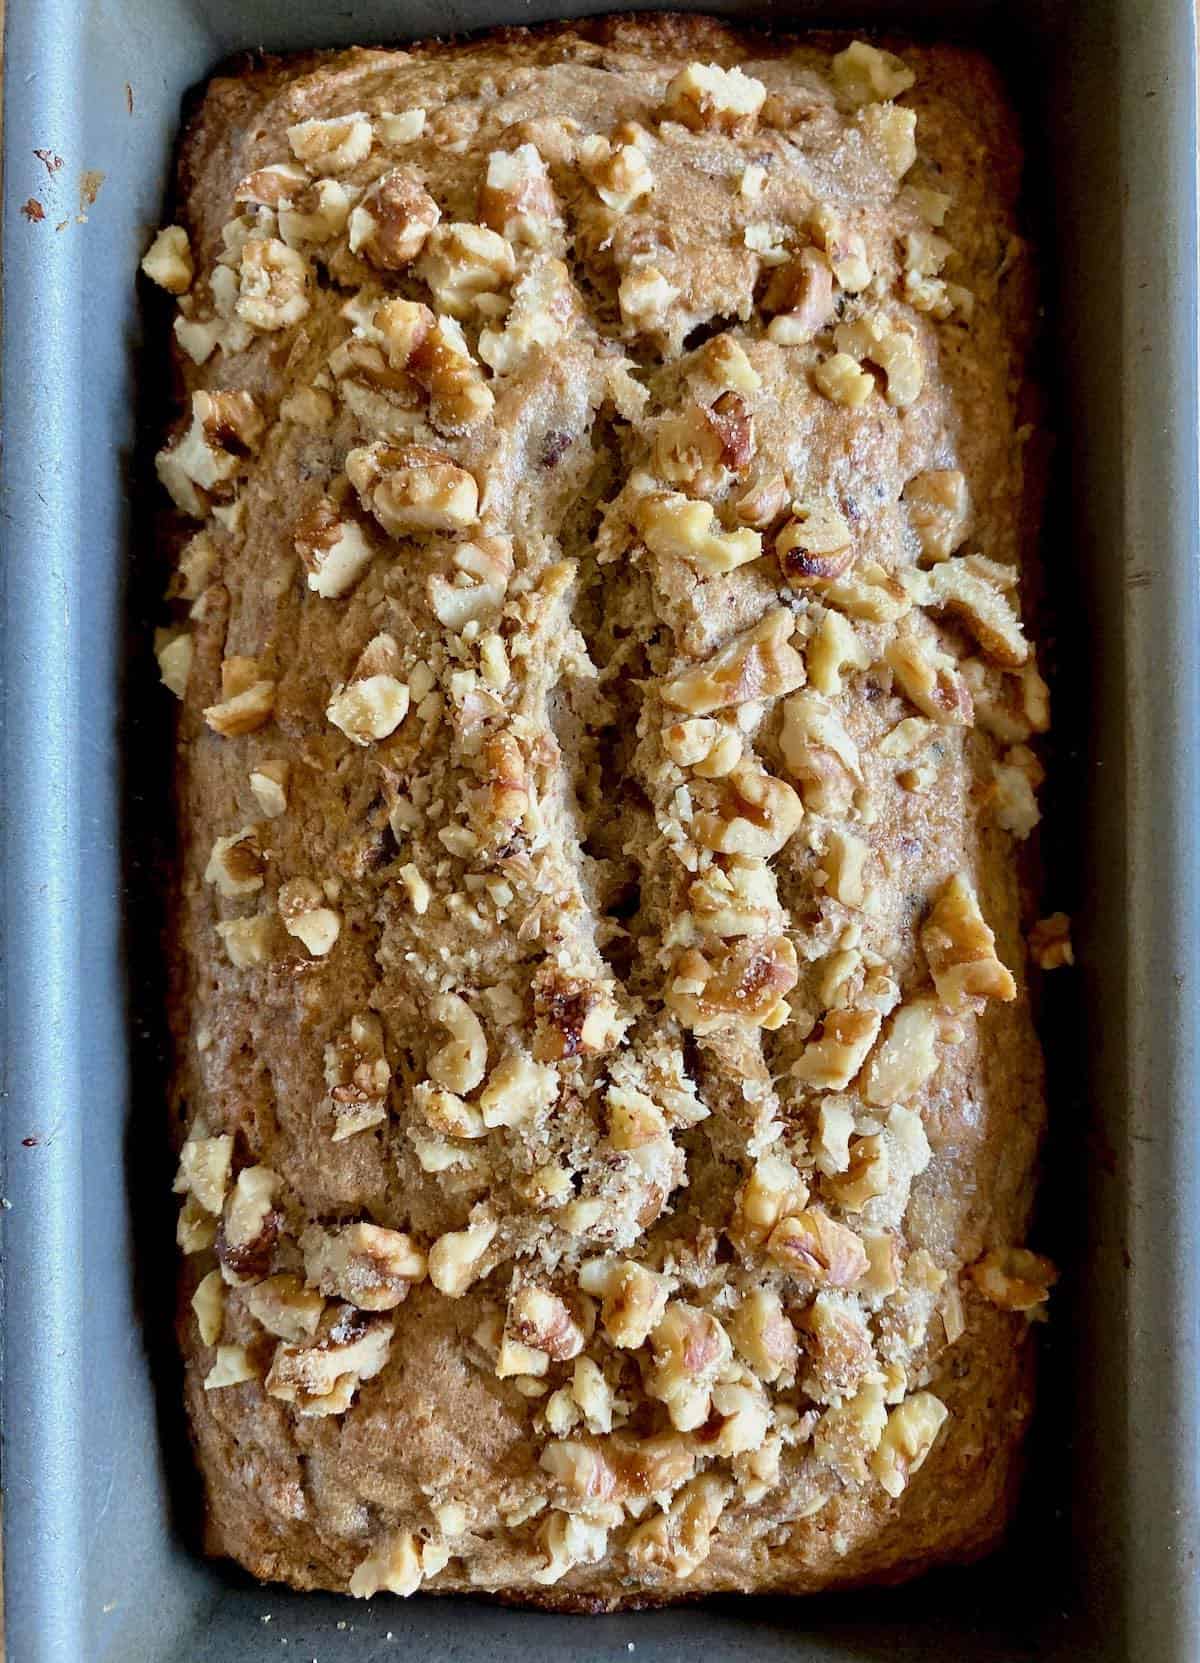 Loaf of banana bread topped with nuts.